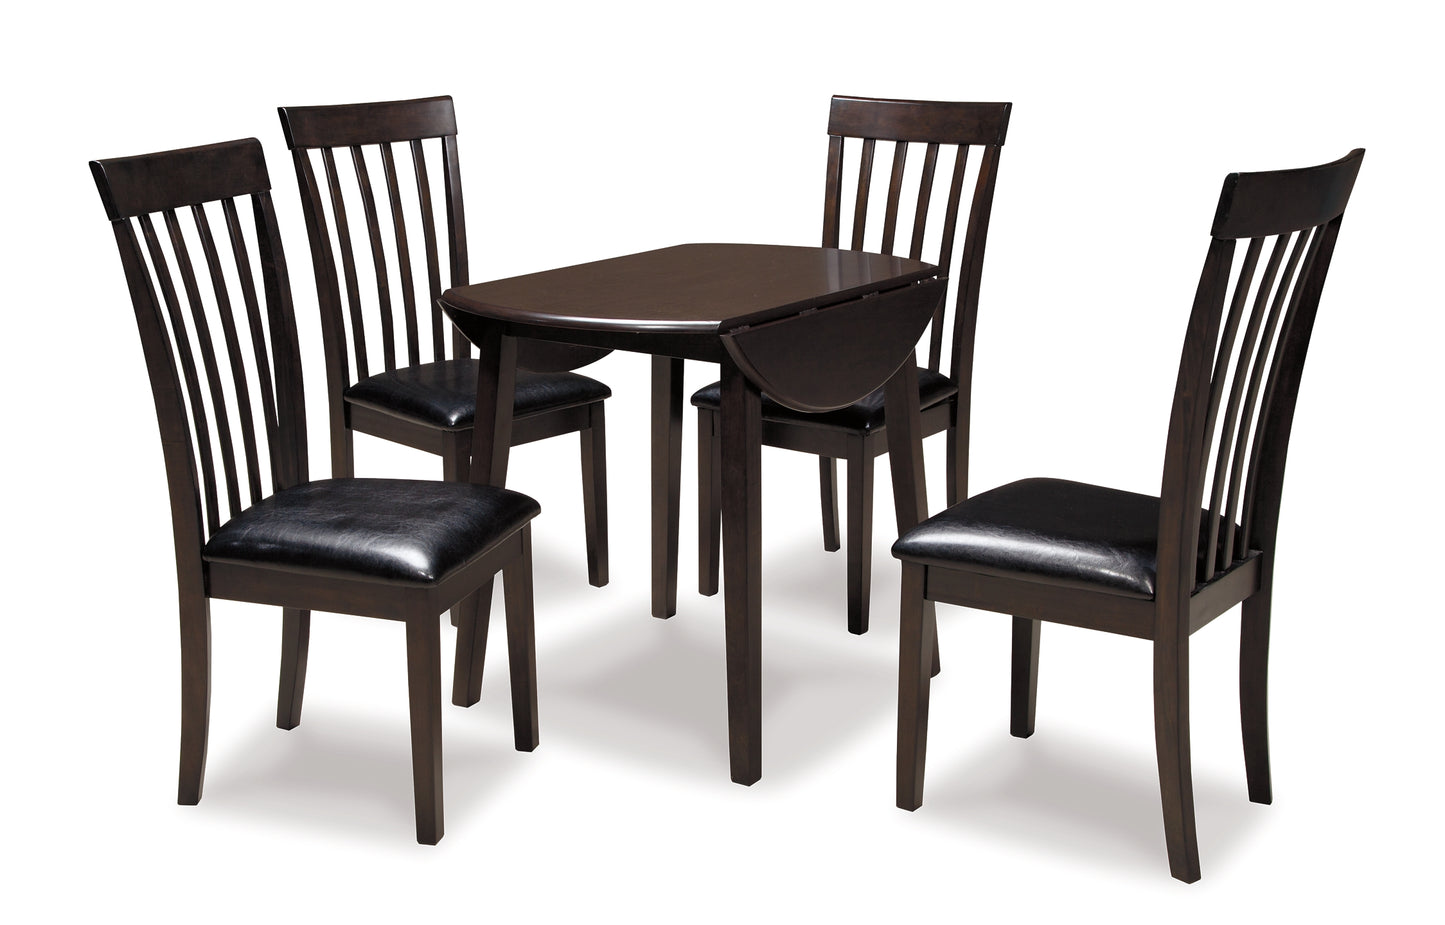 Hammis Dining Table and 4 Chairs JB's Furniture  Home Furniture, Home Decor, Furniture Store